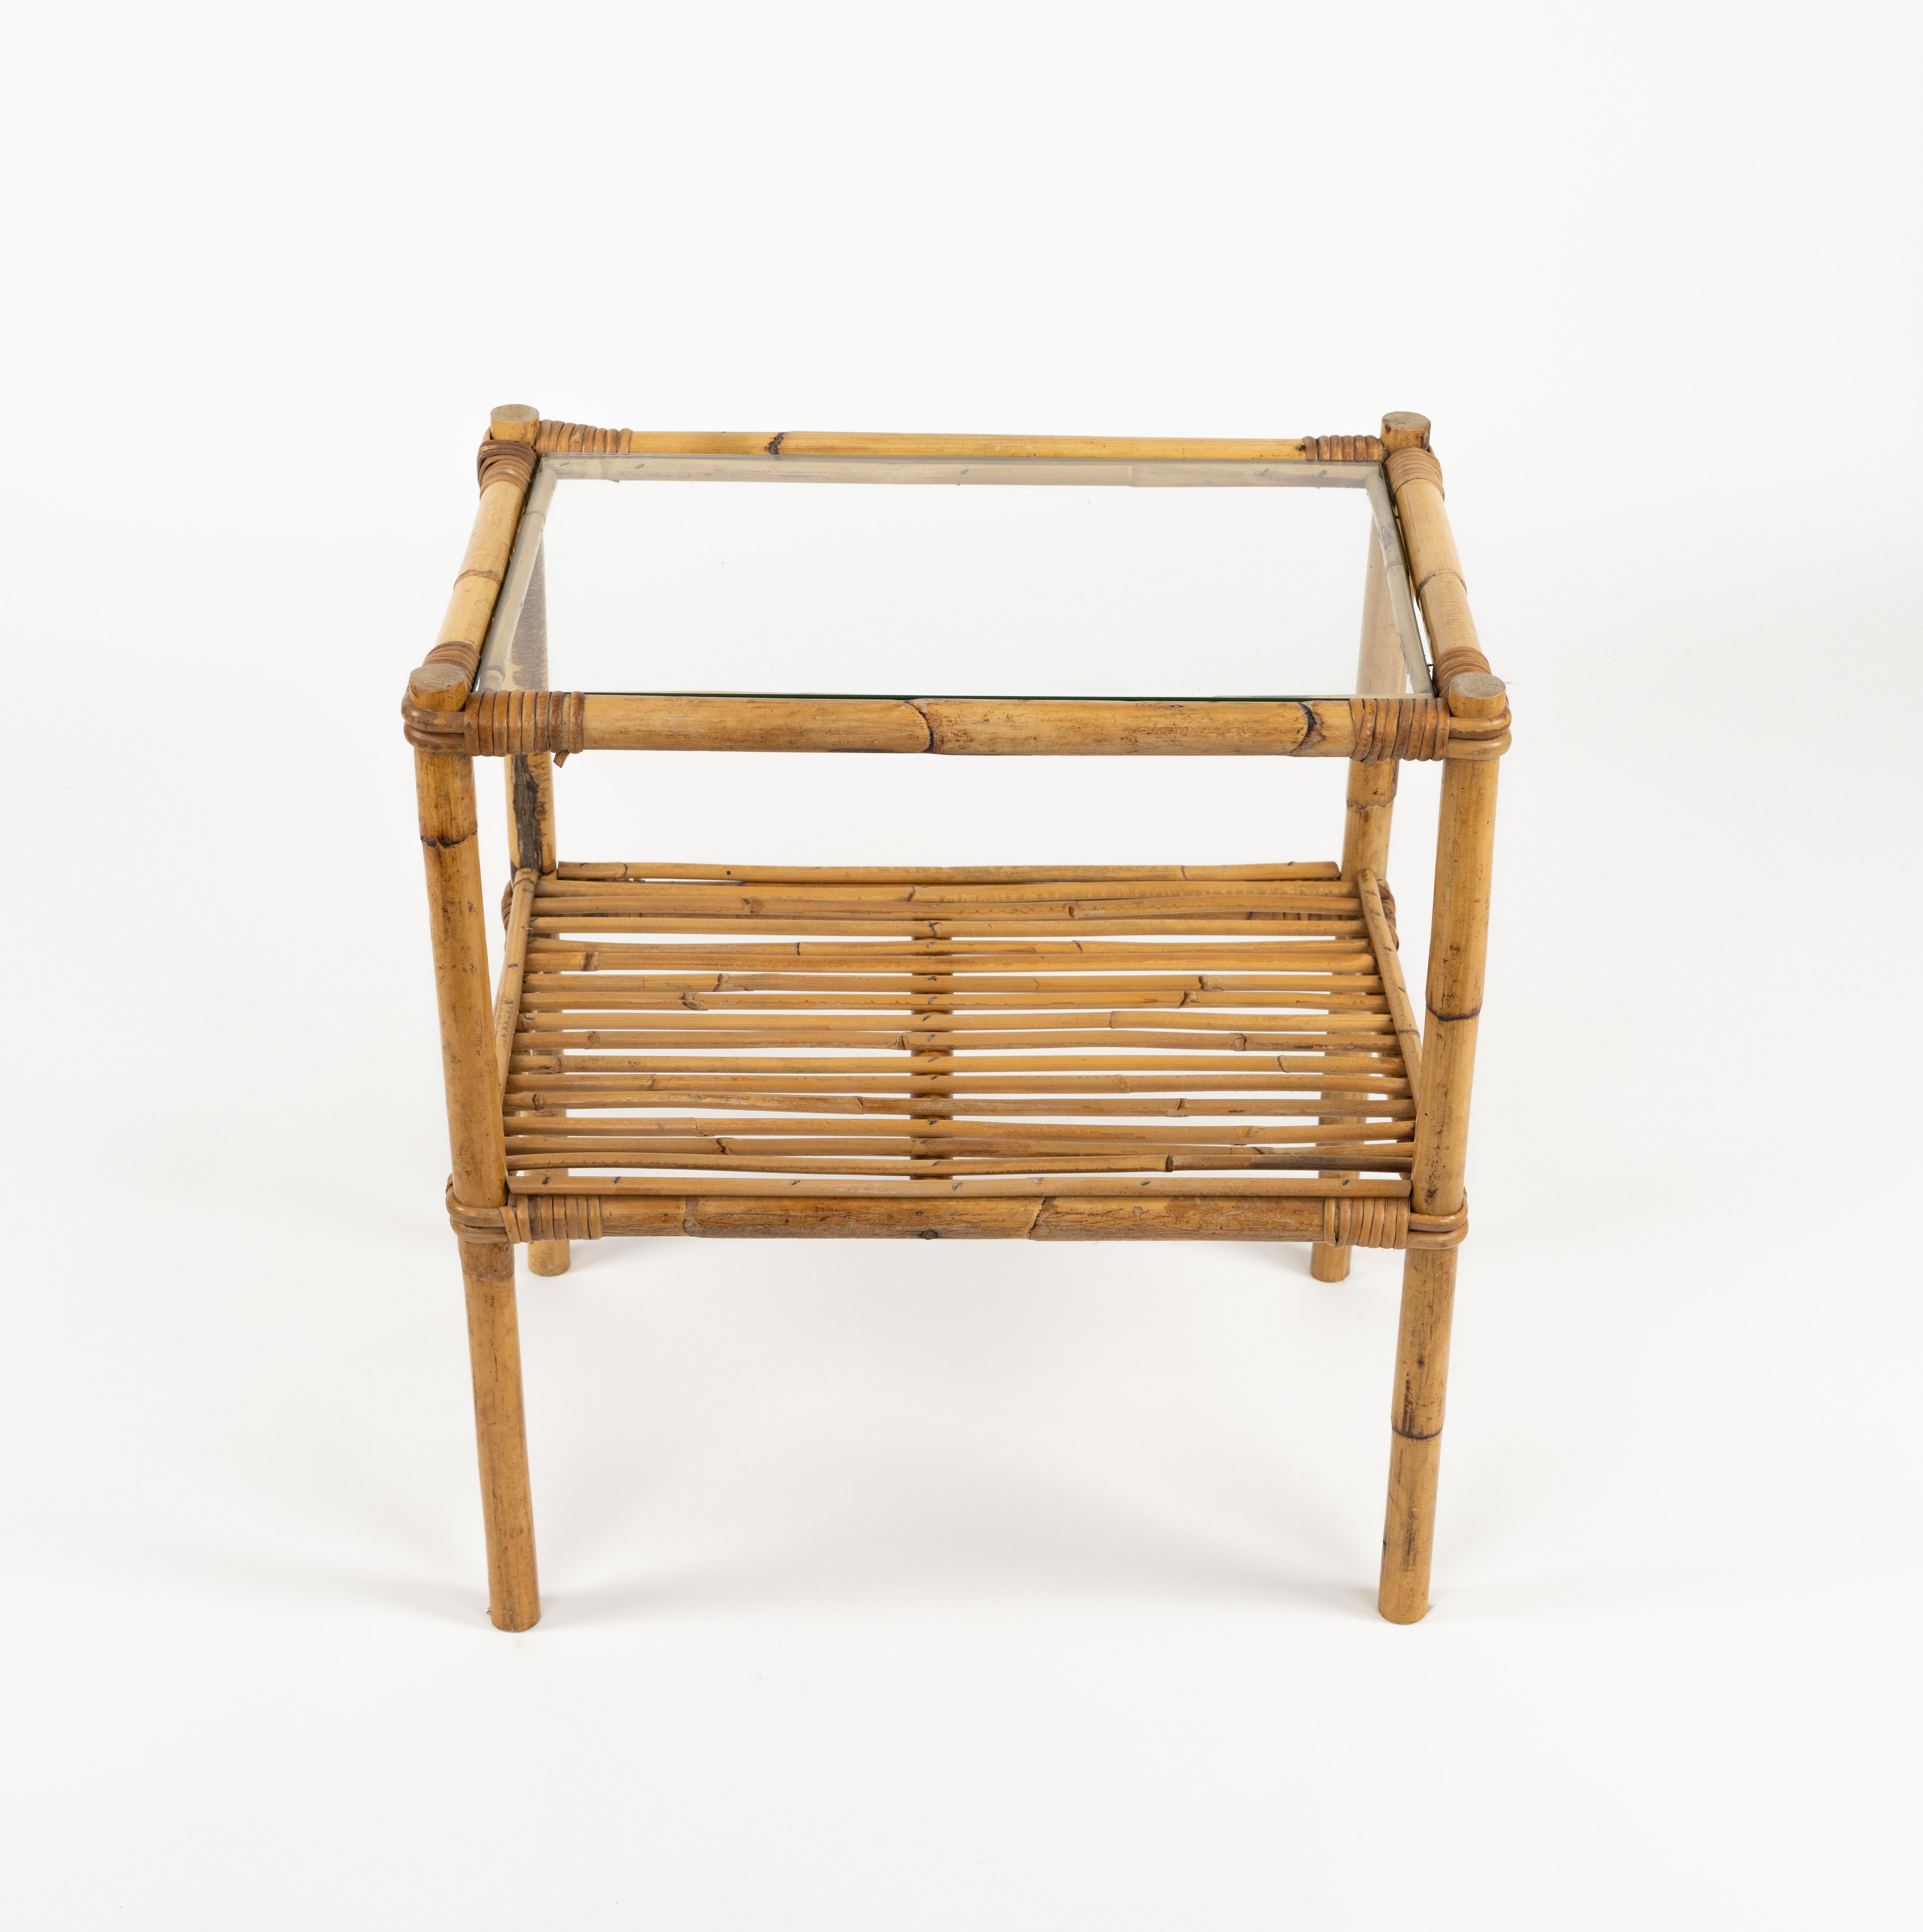 Midcentury Side Table in Bamboo, Rattan and Glass, Italy 1970s For Sale 3